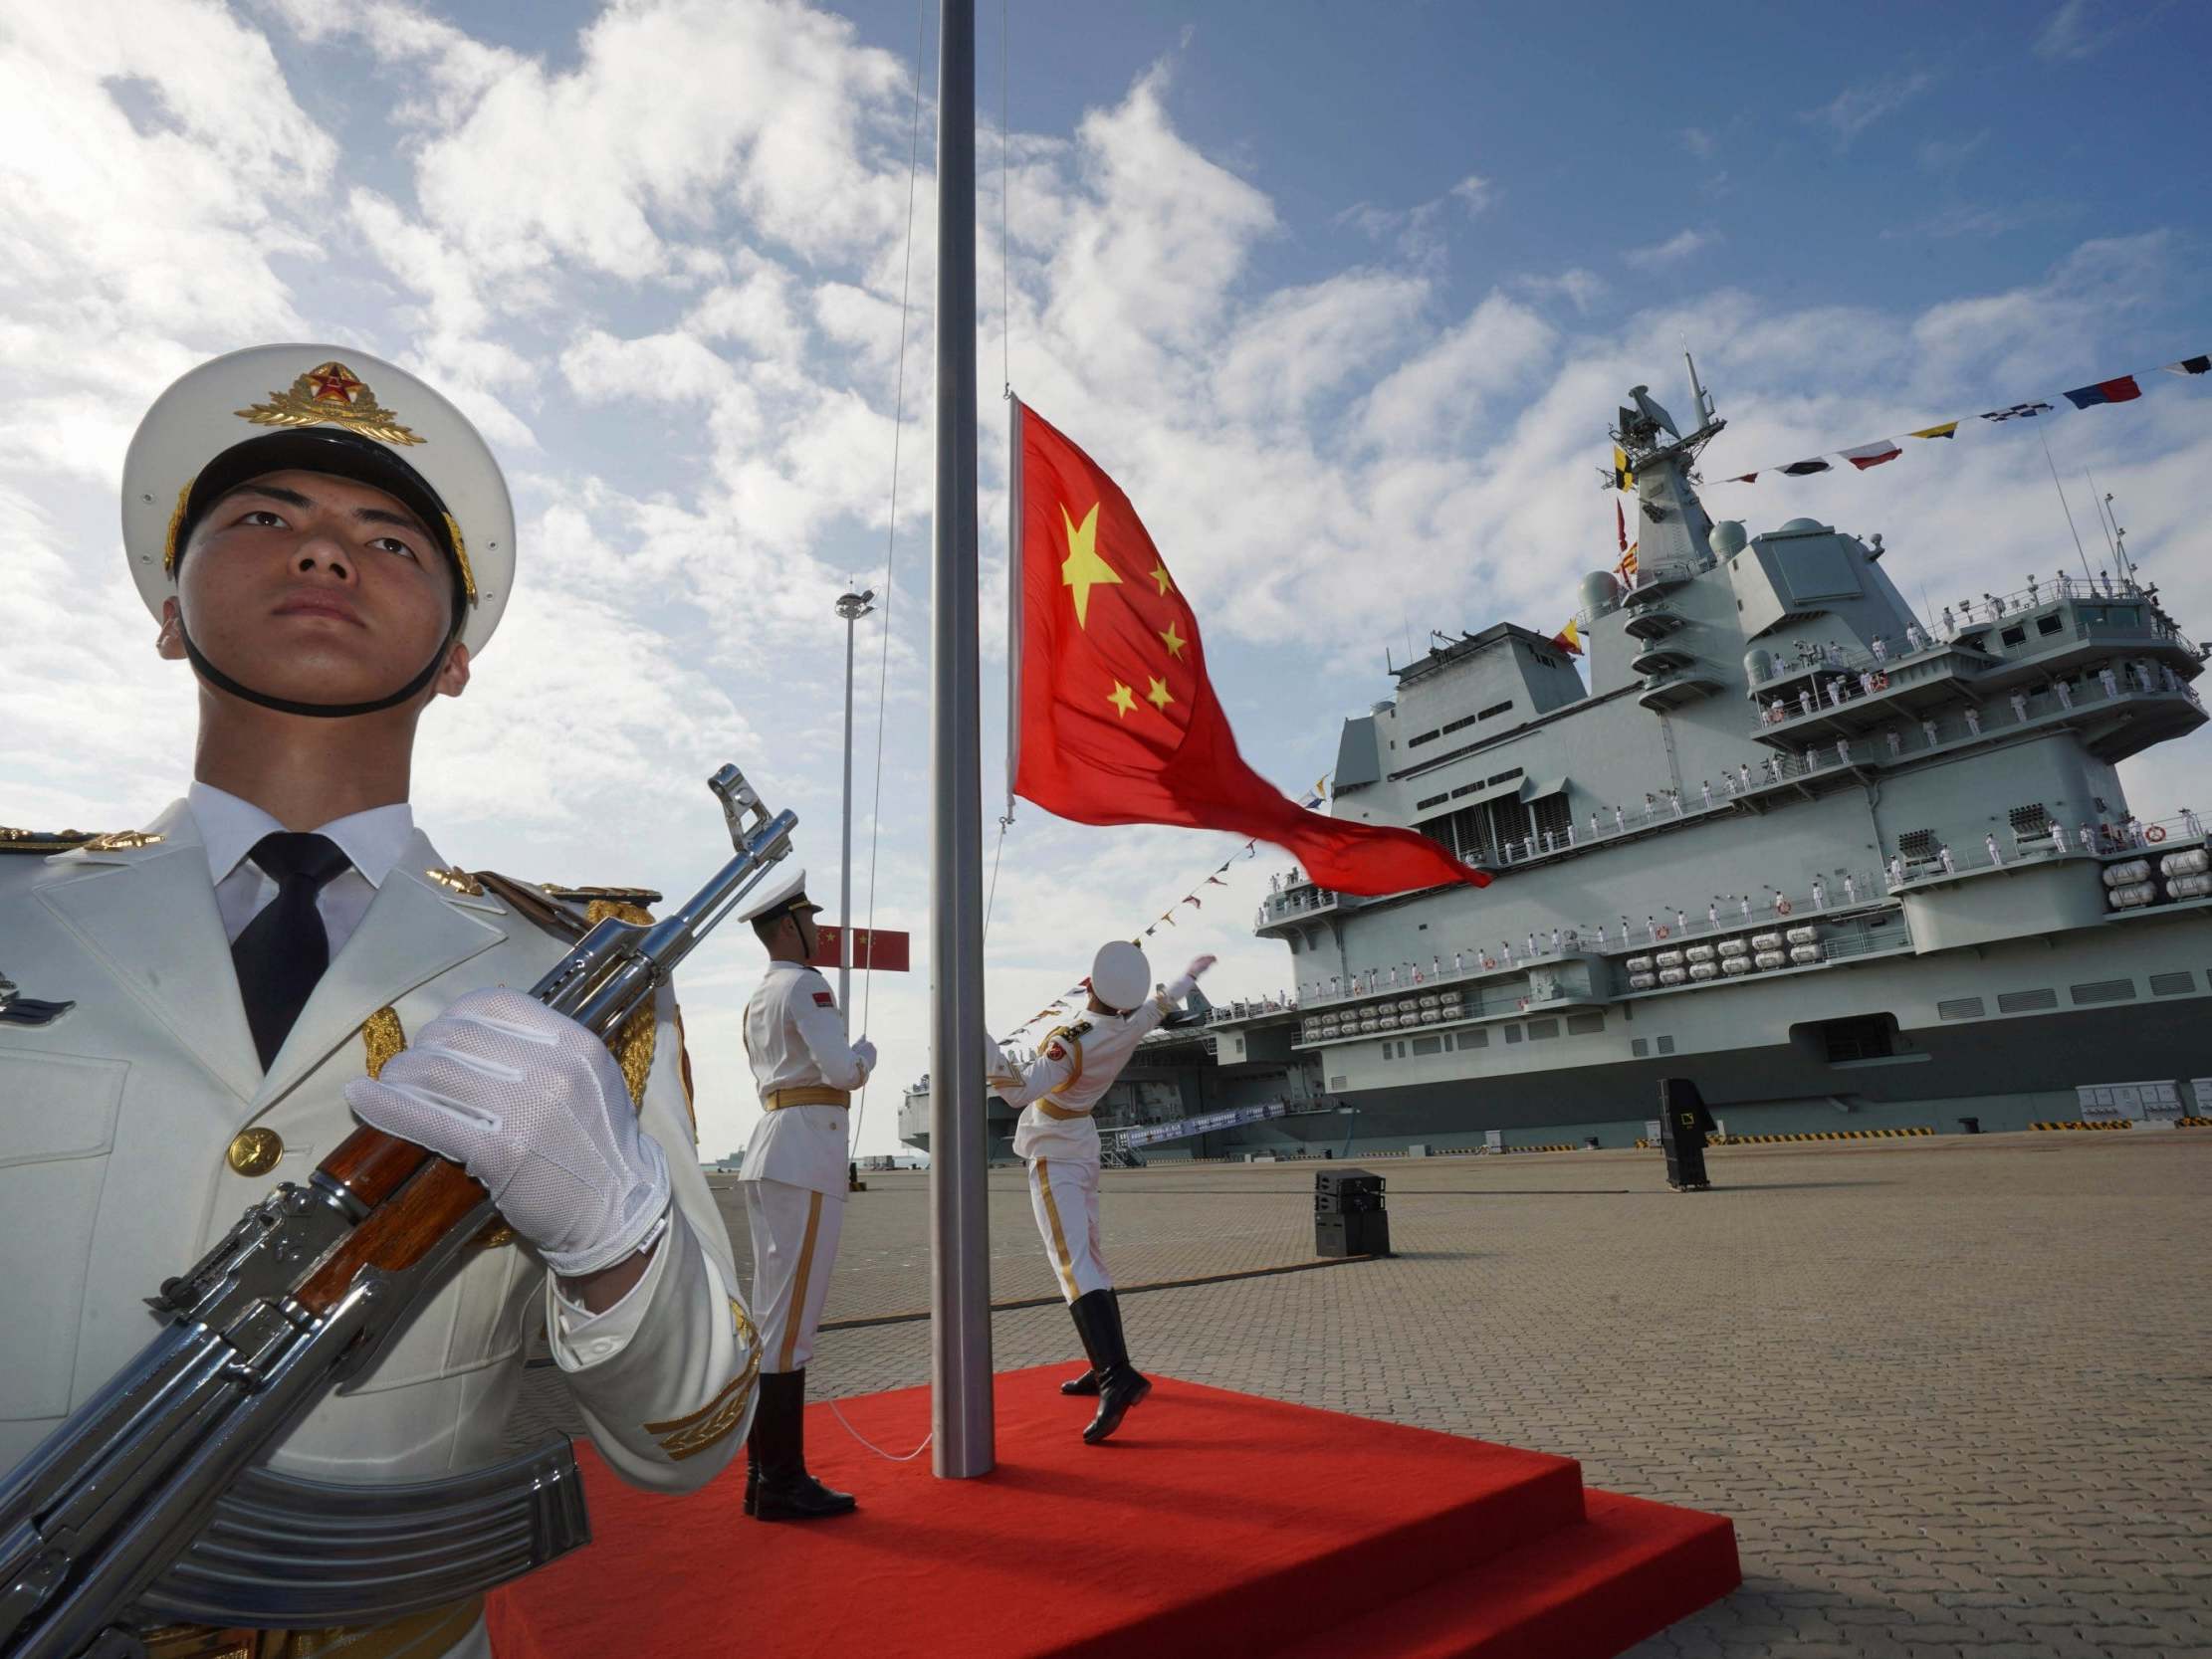 China has expanded its military capabilites in recent years amid heightened tensions in the South and East China Seas